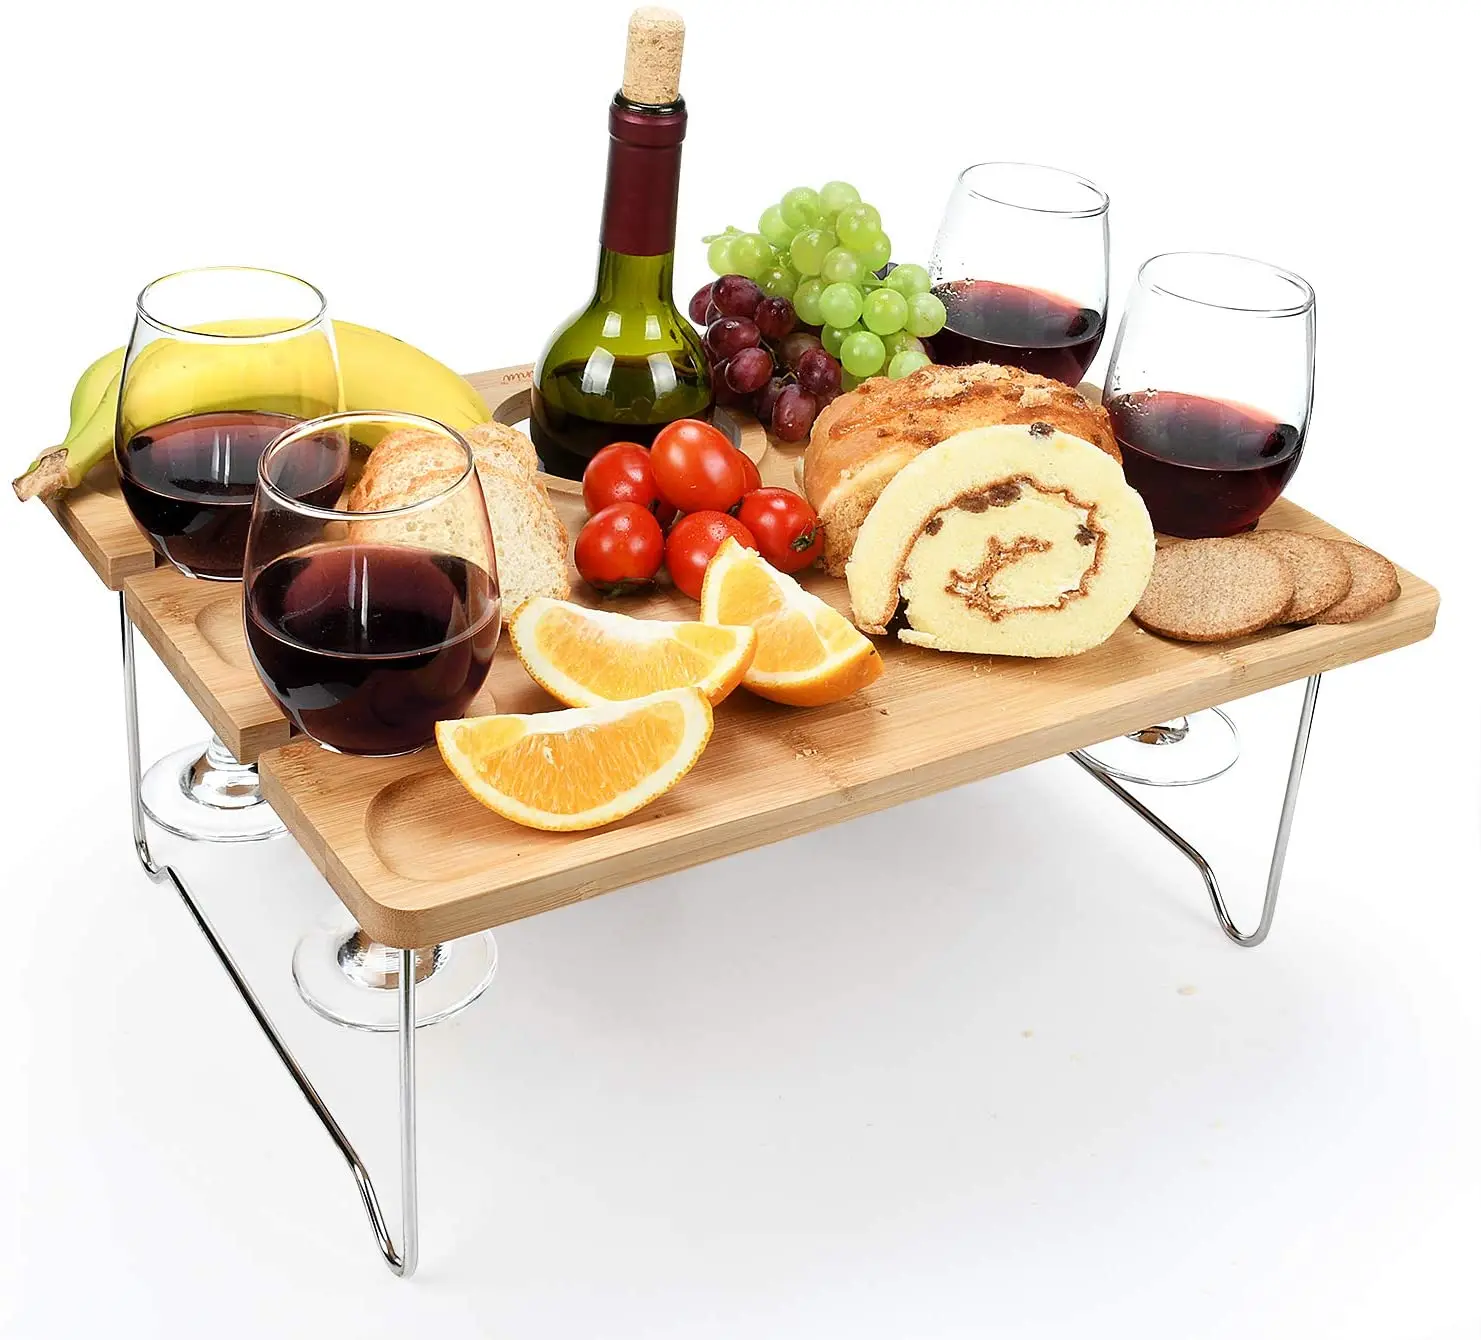 Outdoor Food Serving Tray,Removeable Wine And Snack Holder,Portable Wooden Picnic Table Folding With Legs